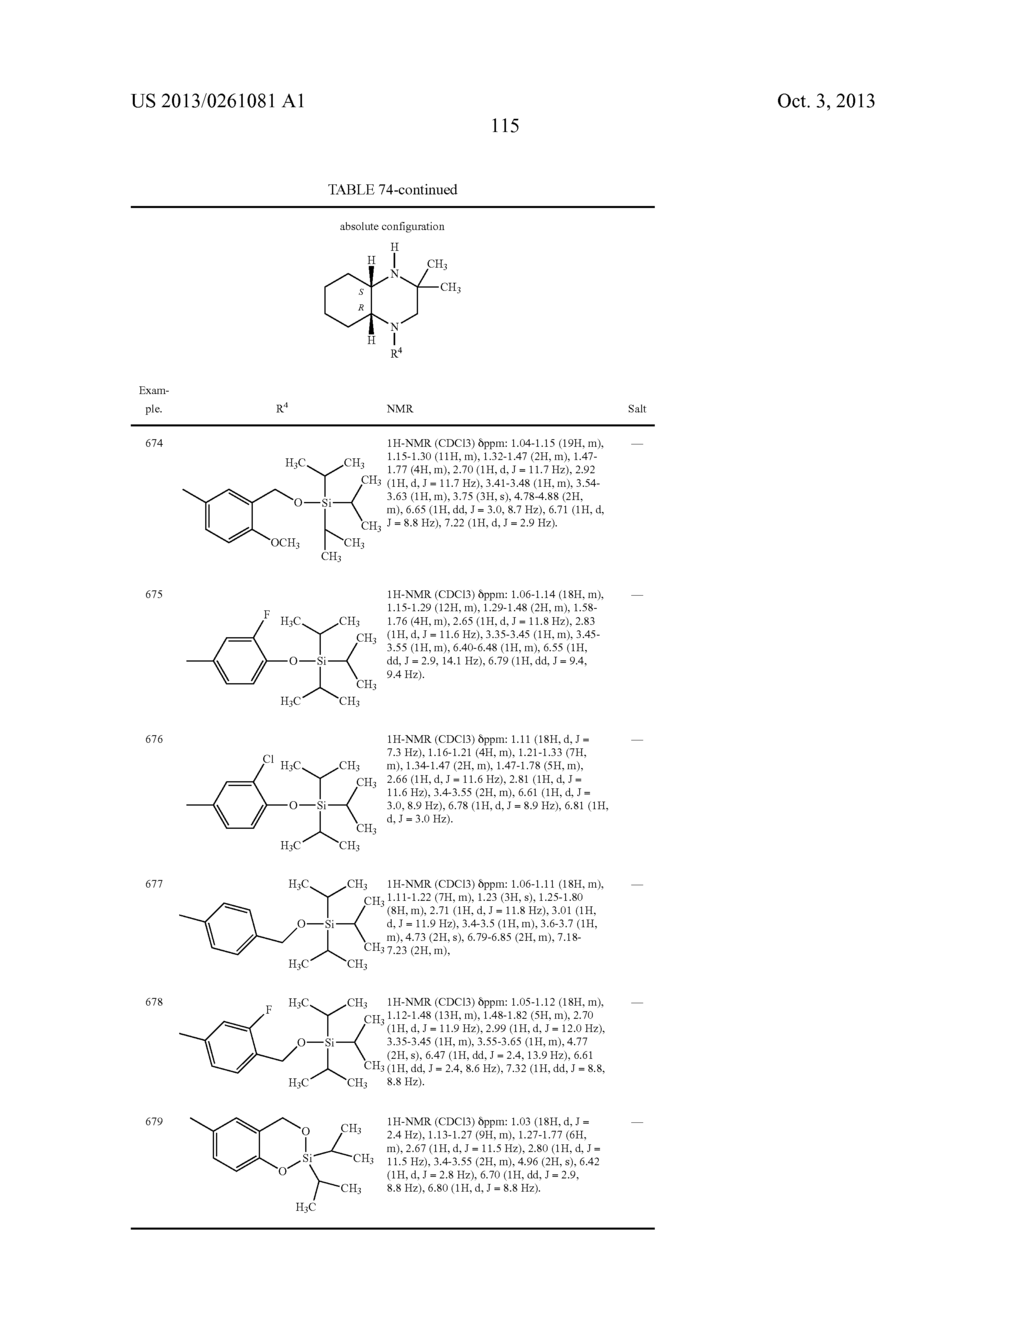 HETEROCYCLIC COMPOUNDS FOR TREATING OR PREVENTING DISORDERS CAUSED BY     REDUCED NEUROTRANSMISSION OF SEROTONIN, NOREPHNEPHRINE OR DOPAMINE - diagram, schematic, and image 116